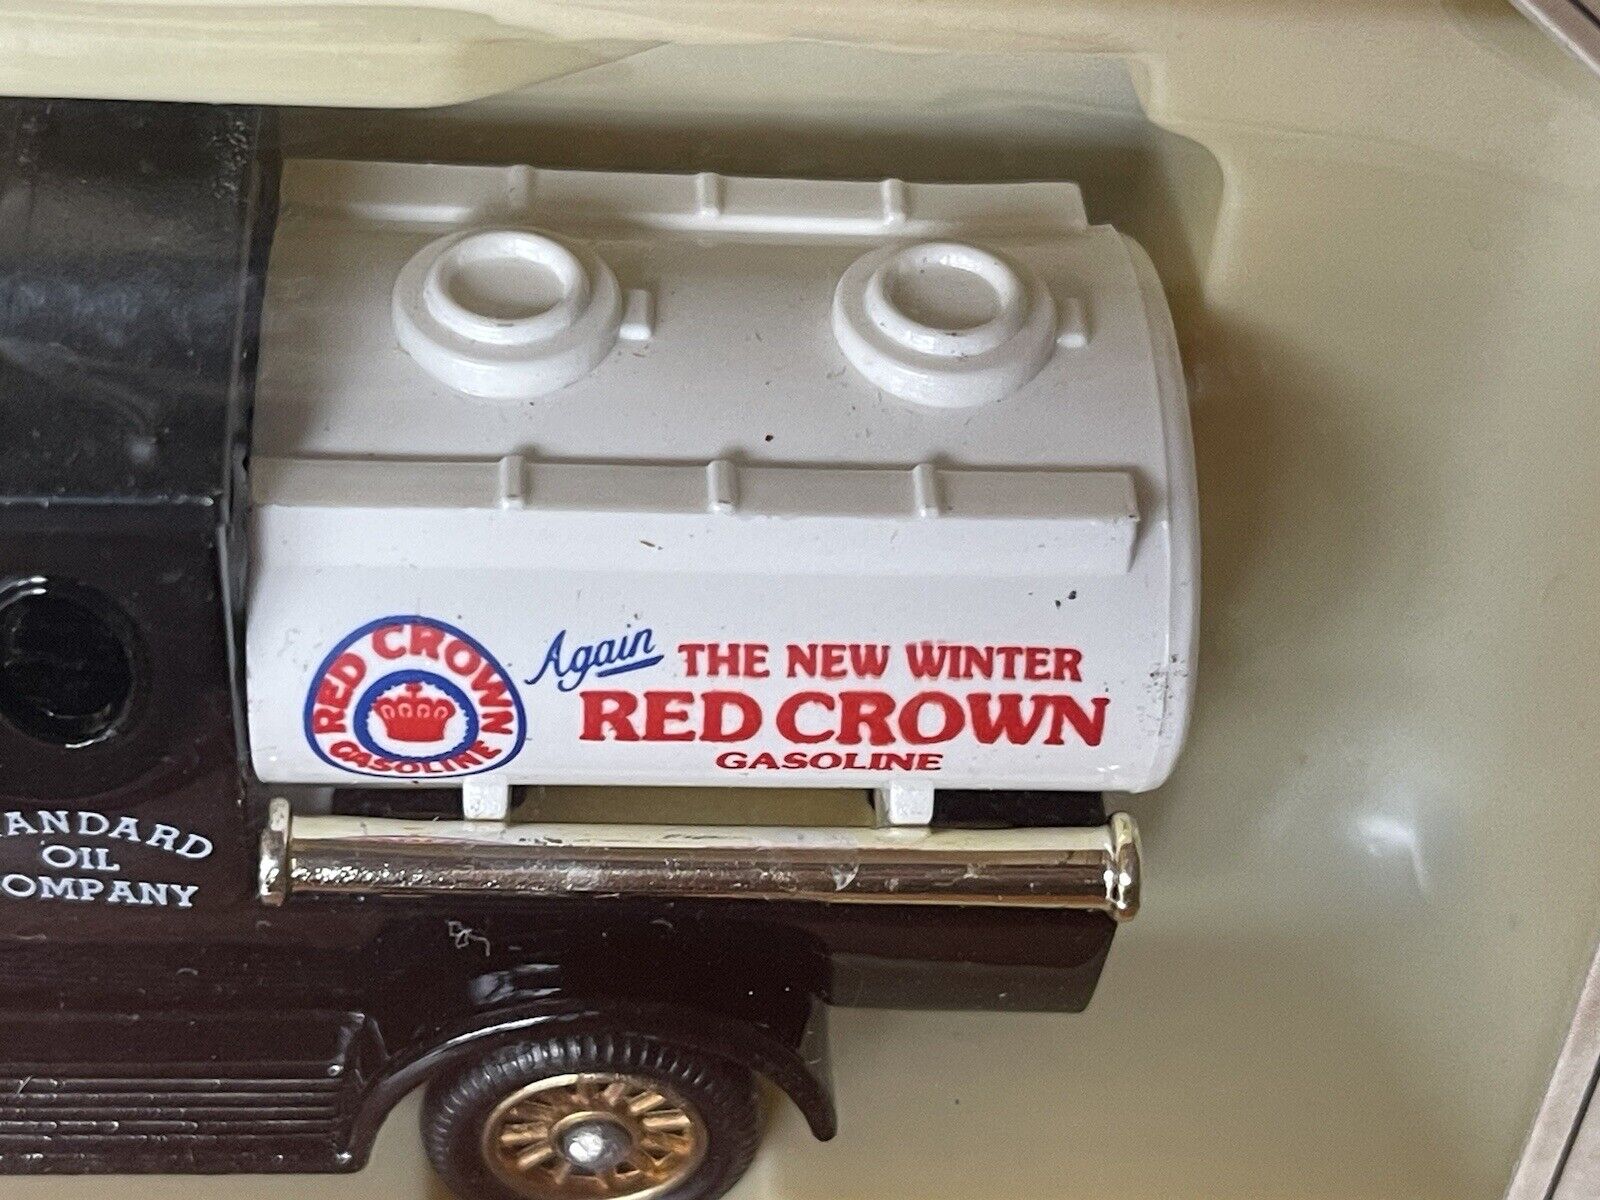 Lledo Die Cast metal Toy, The New Winter Red Crown Gasoline Truck, New in Box,